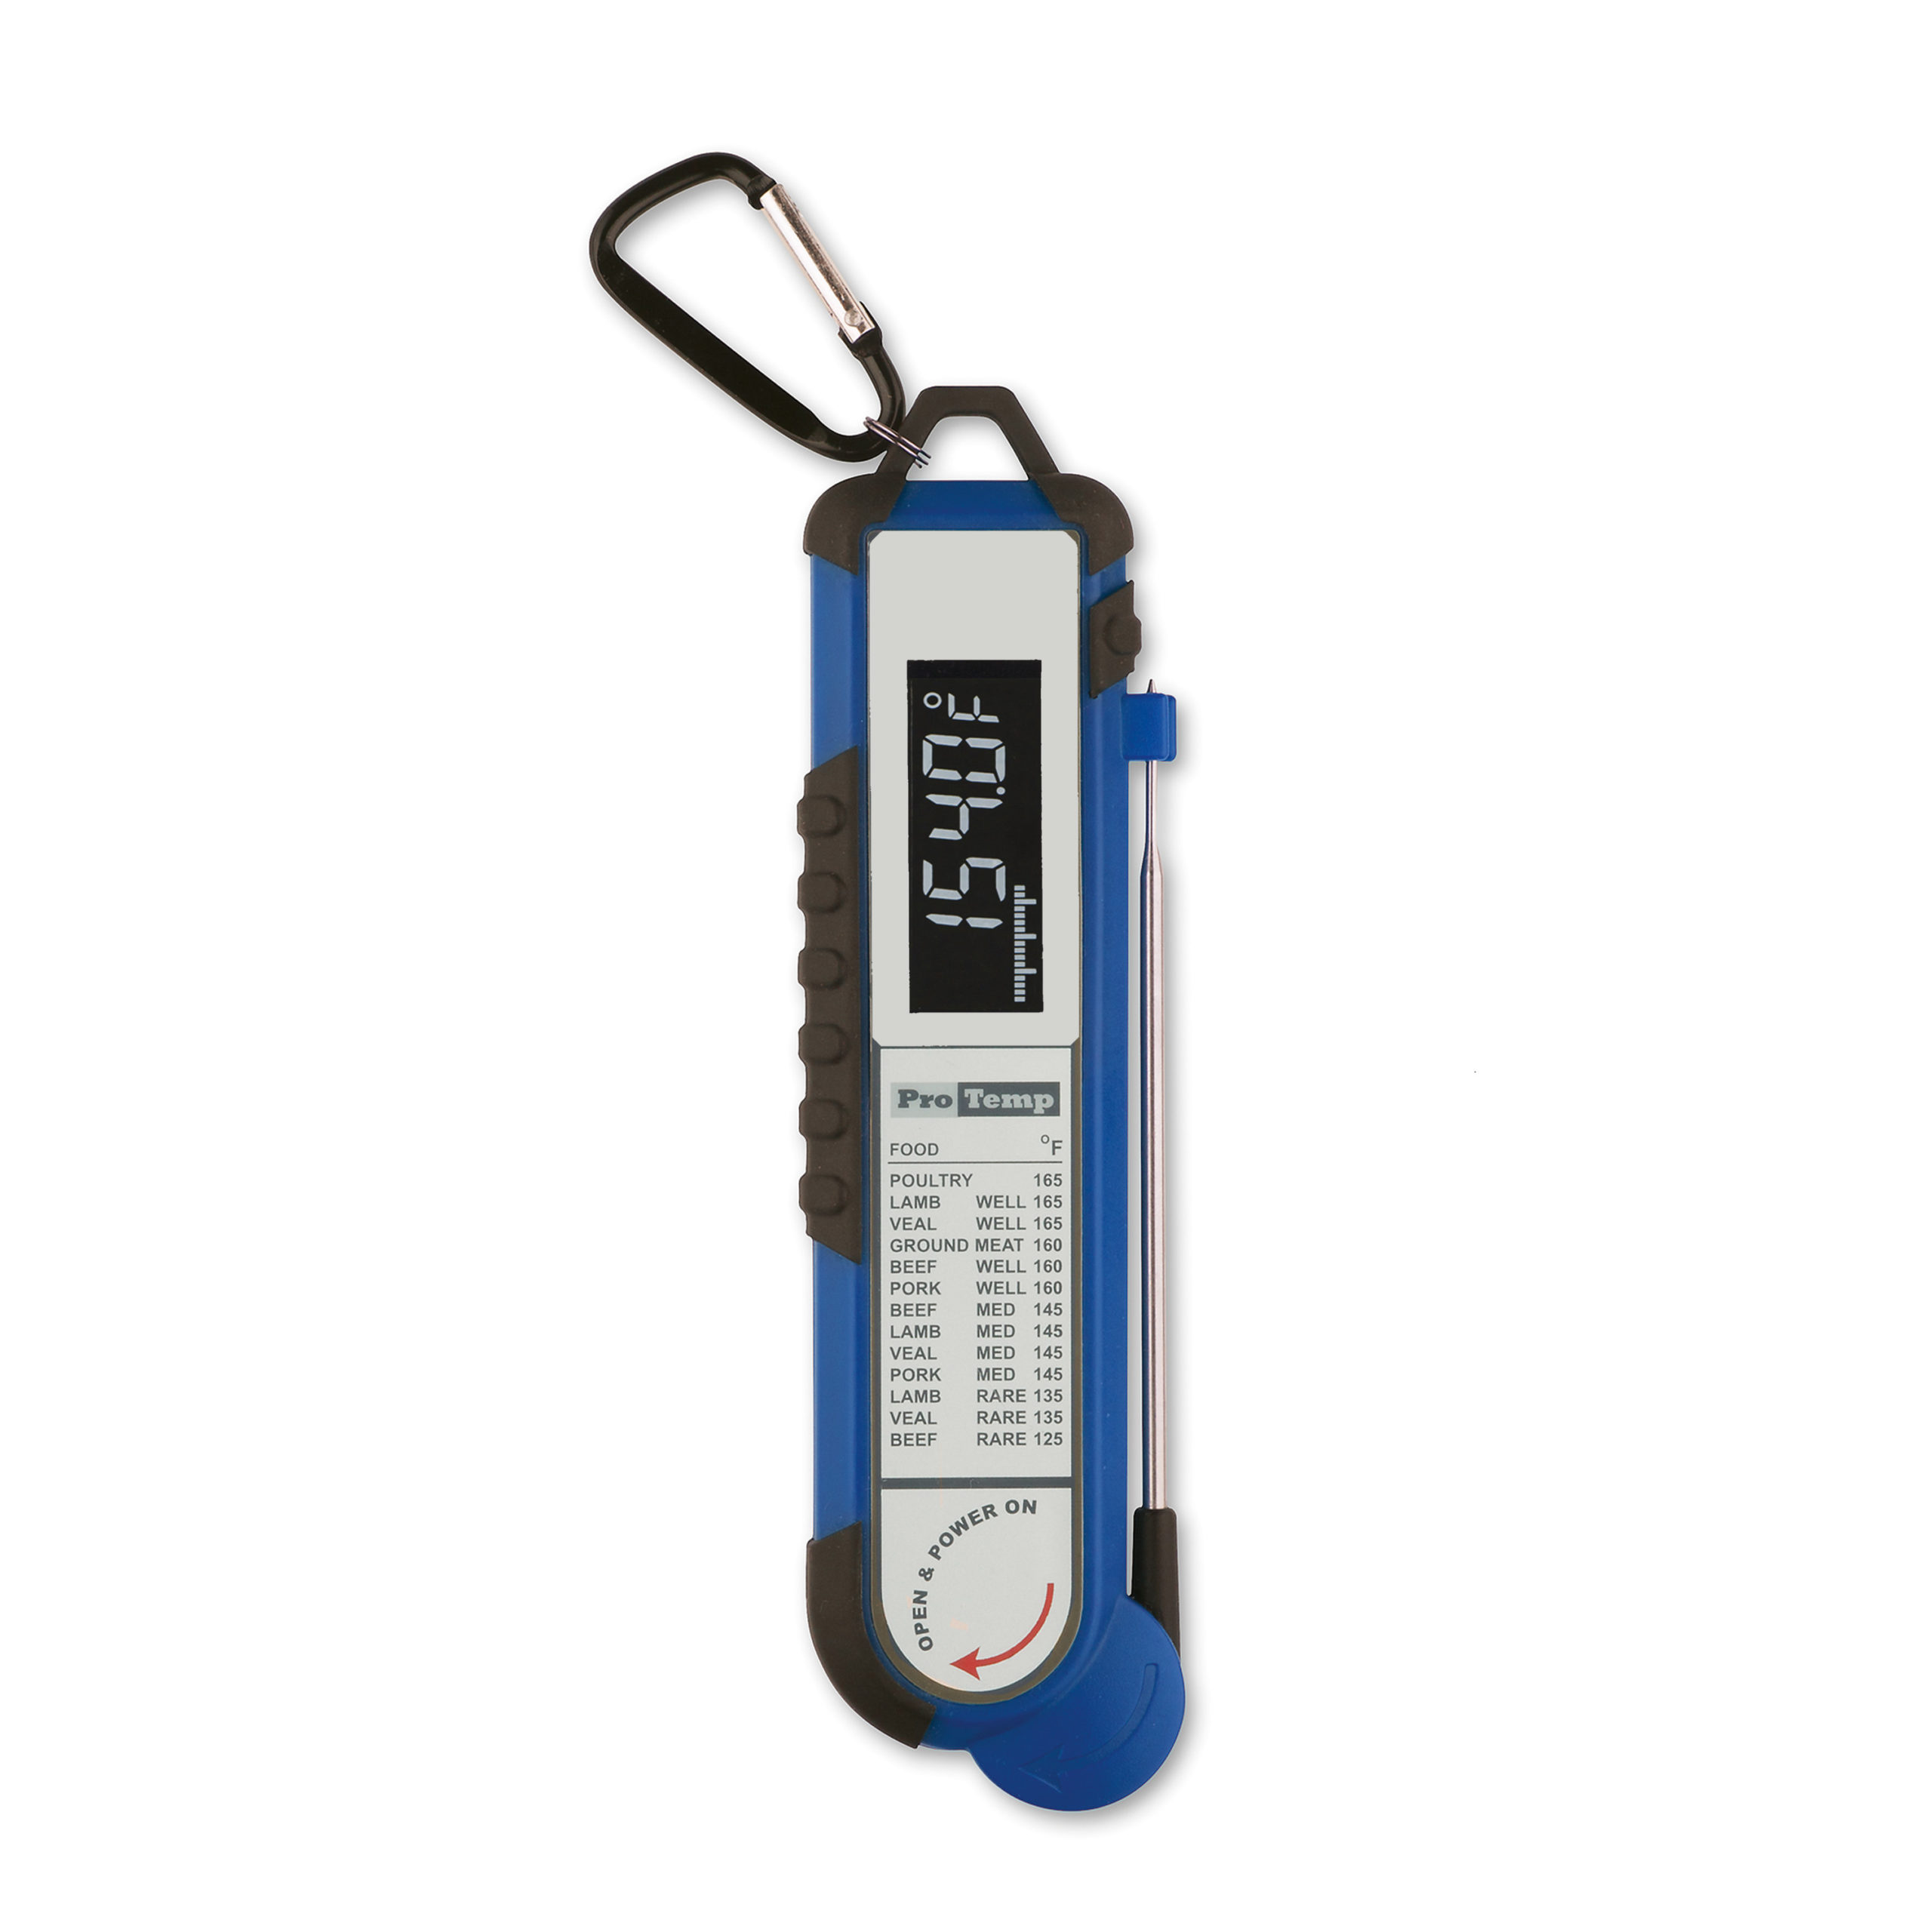 https://www.maverickthermometers.com/wp-content/uploads/2018/05/PT-100_lcb-scaled.jpg